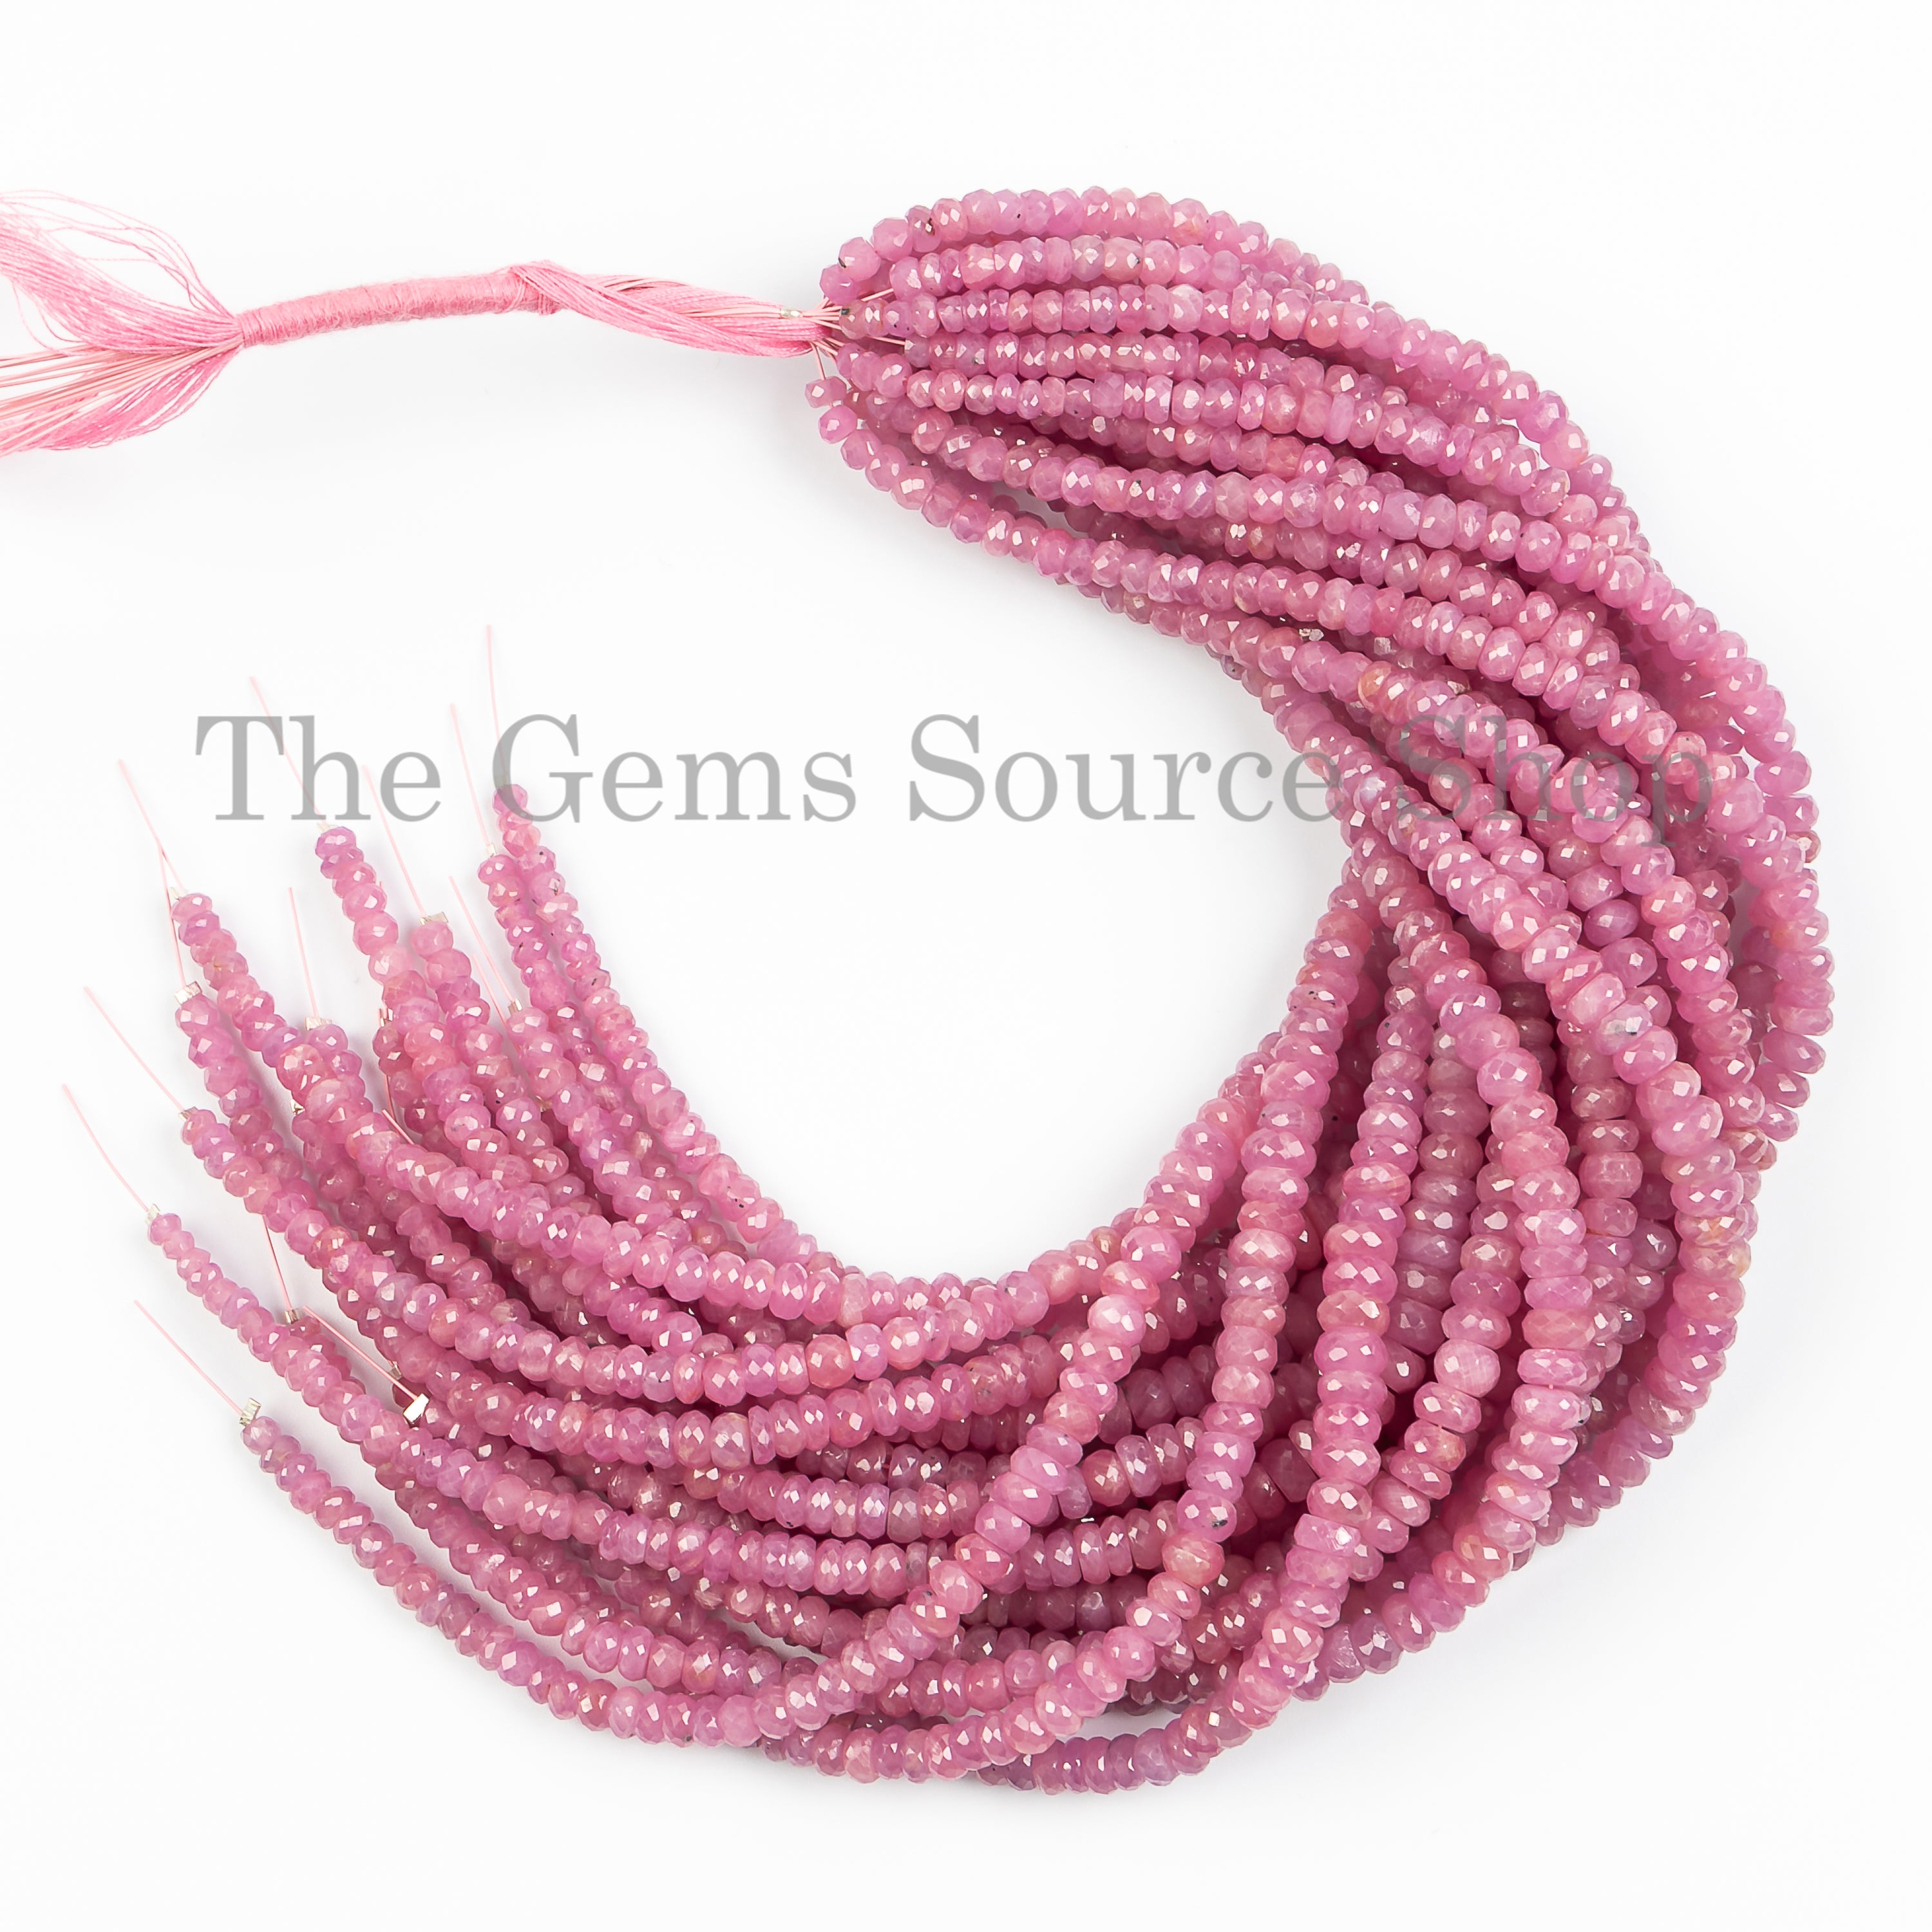 4-6mm Pink Sapphire Beads, Pink Sapphire Faceted Rondelle Beads, Sapphire Rondelle Beads, Faceted Sapphire Beads, Pink Sapphire Gemstone